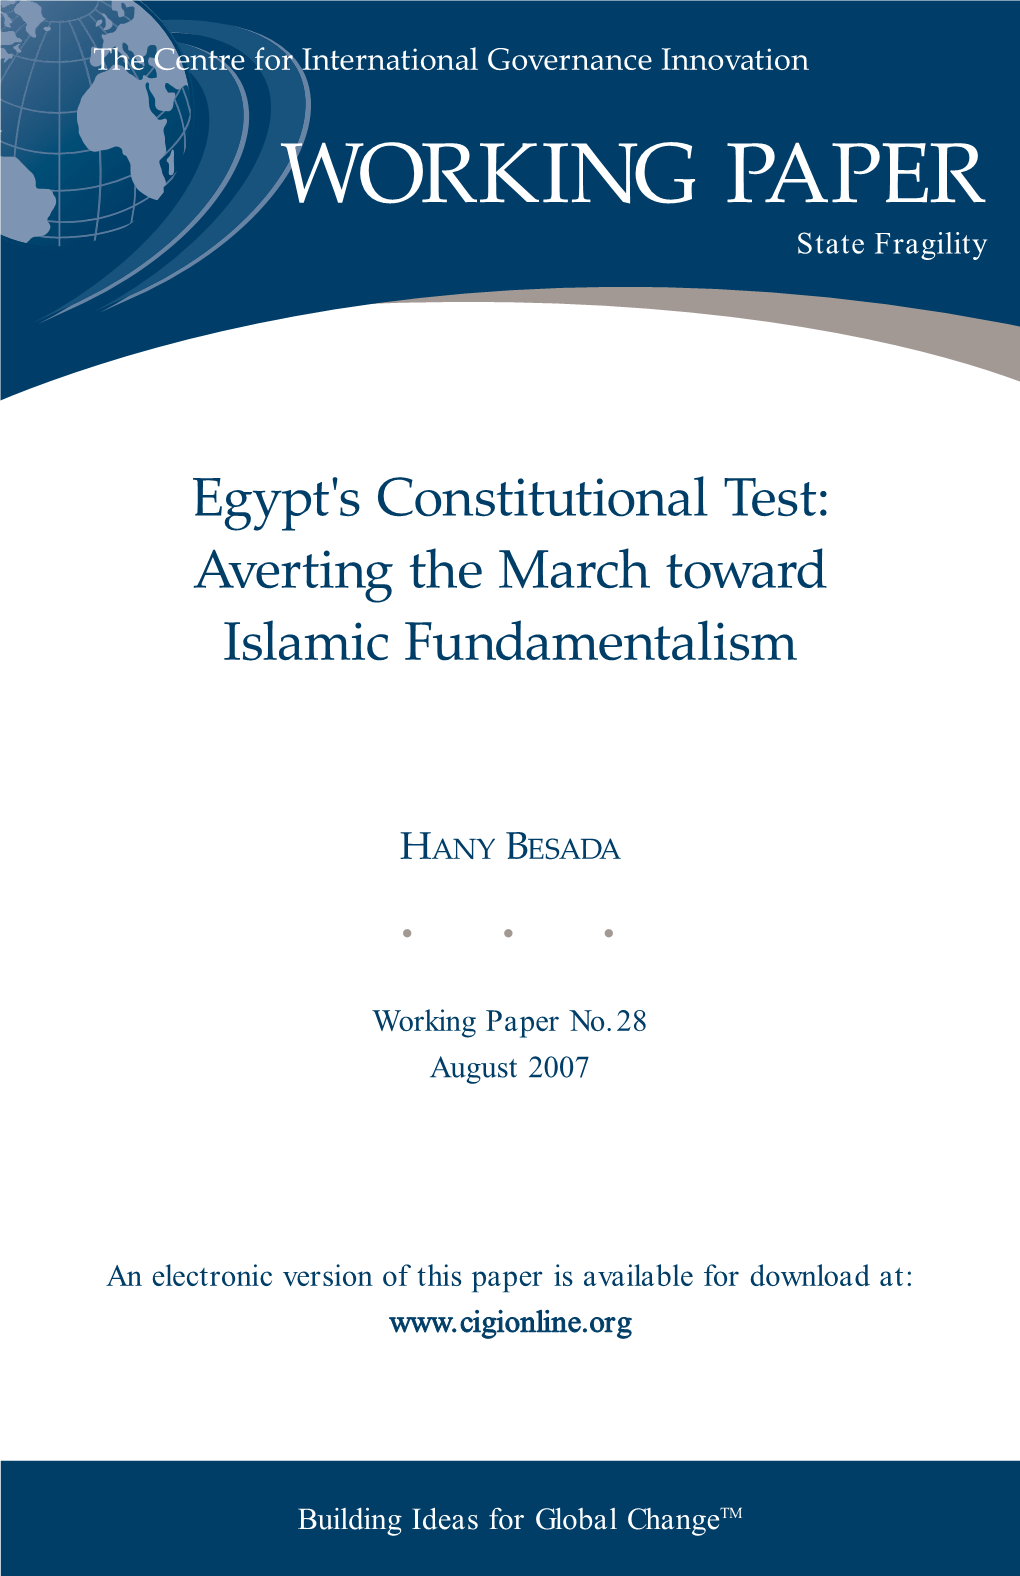 Egypt's Constitutional Test: Averting the March Toward Islamic Fundamentalism